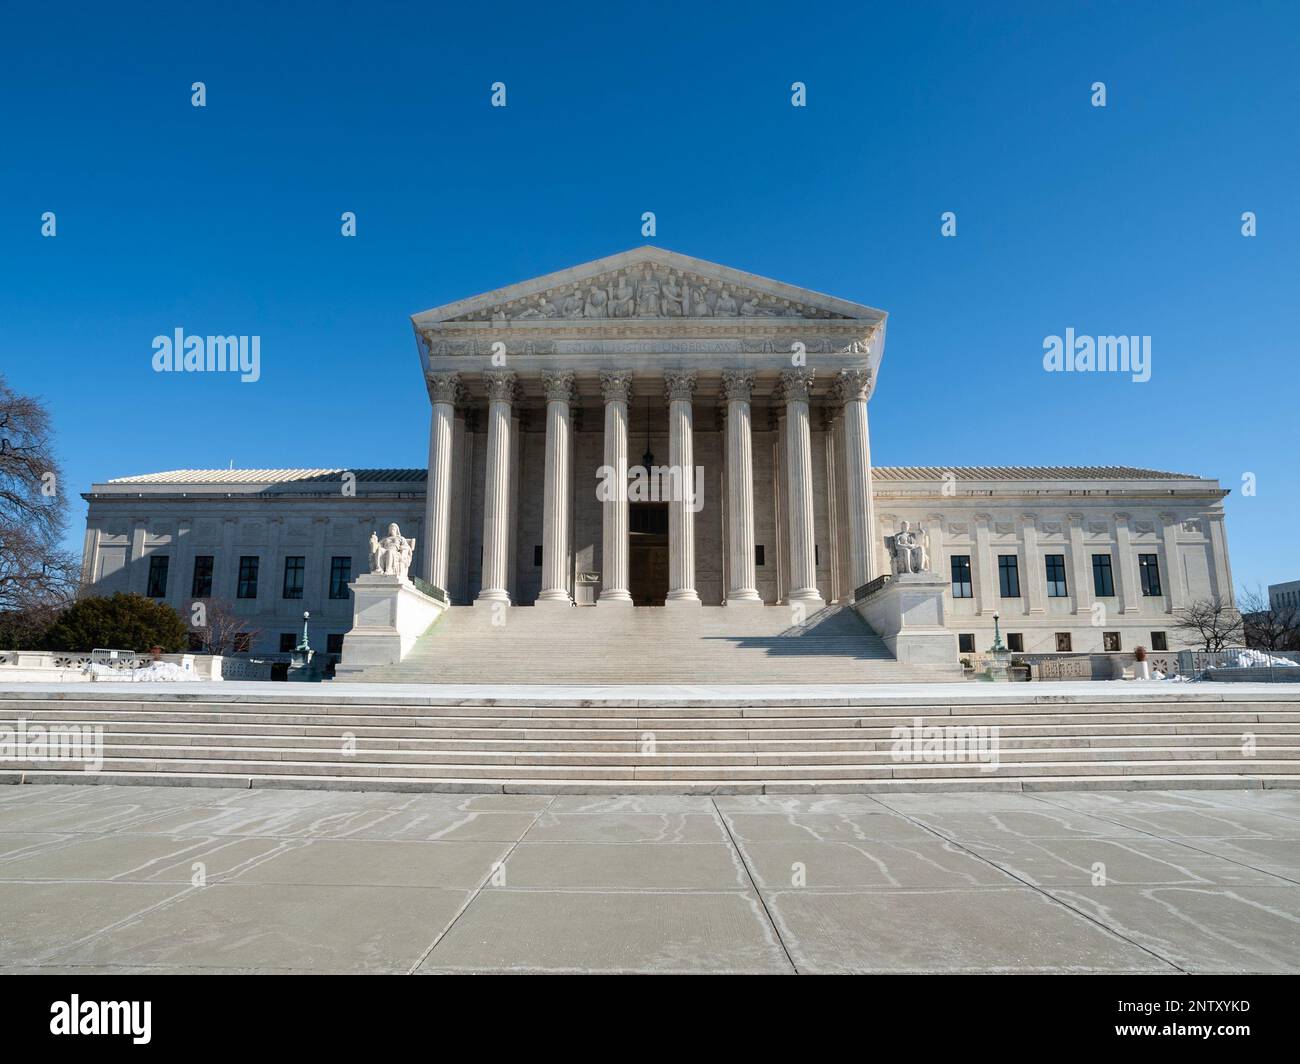 United States Supreme Court Building on Capitol Hill in Washington DC. Stock Photo